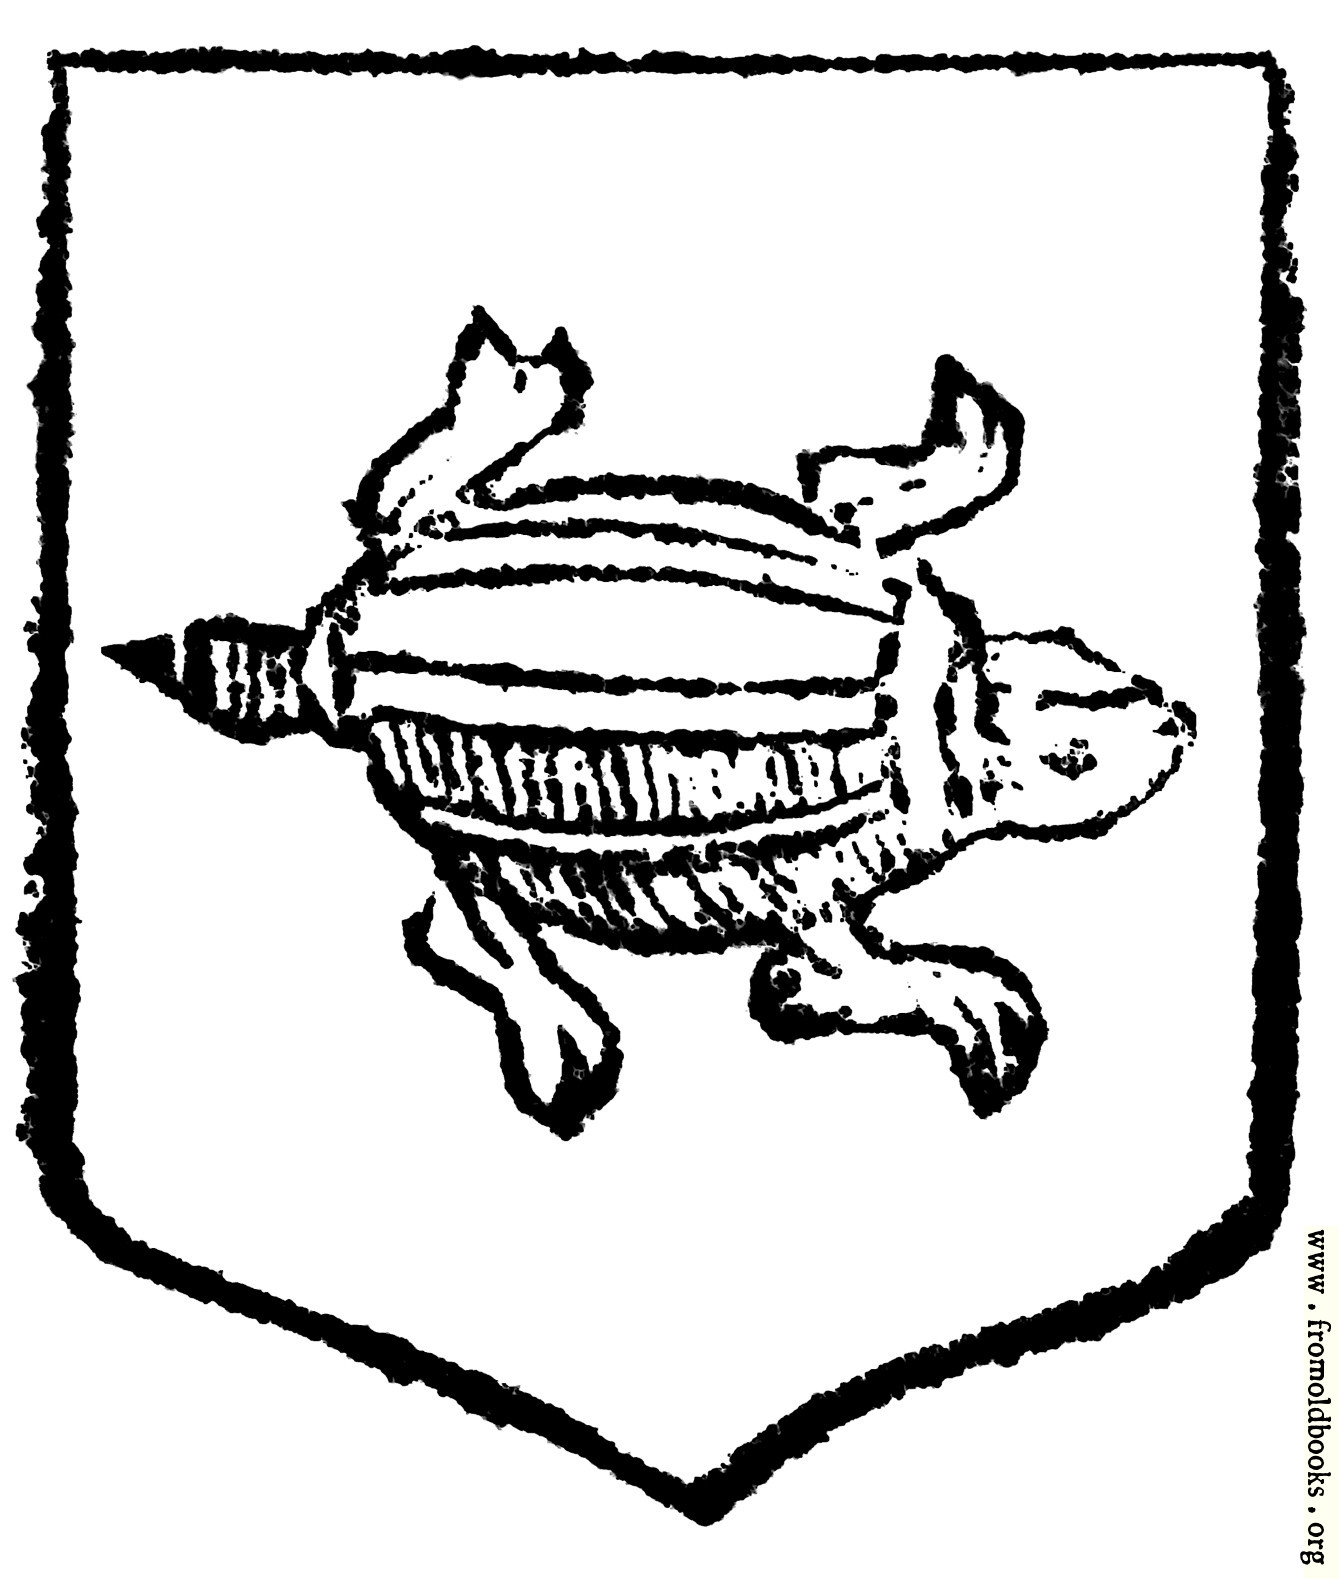 [Picture: Gawdey of Norfolk: The silver tortoise]